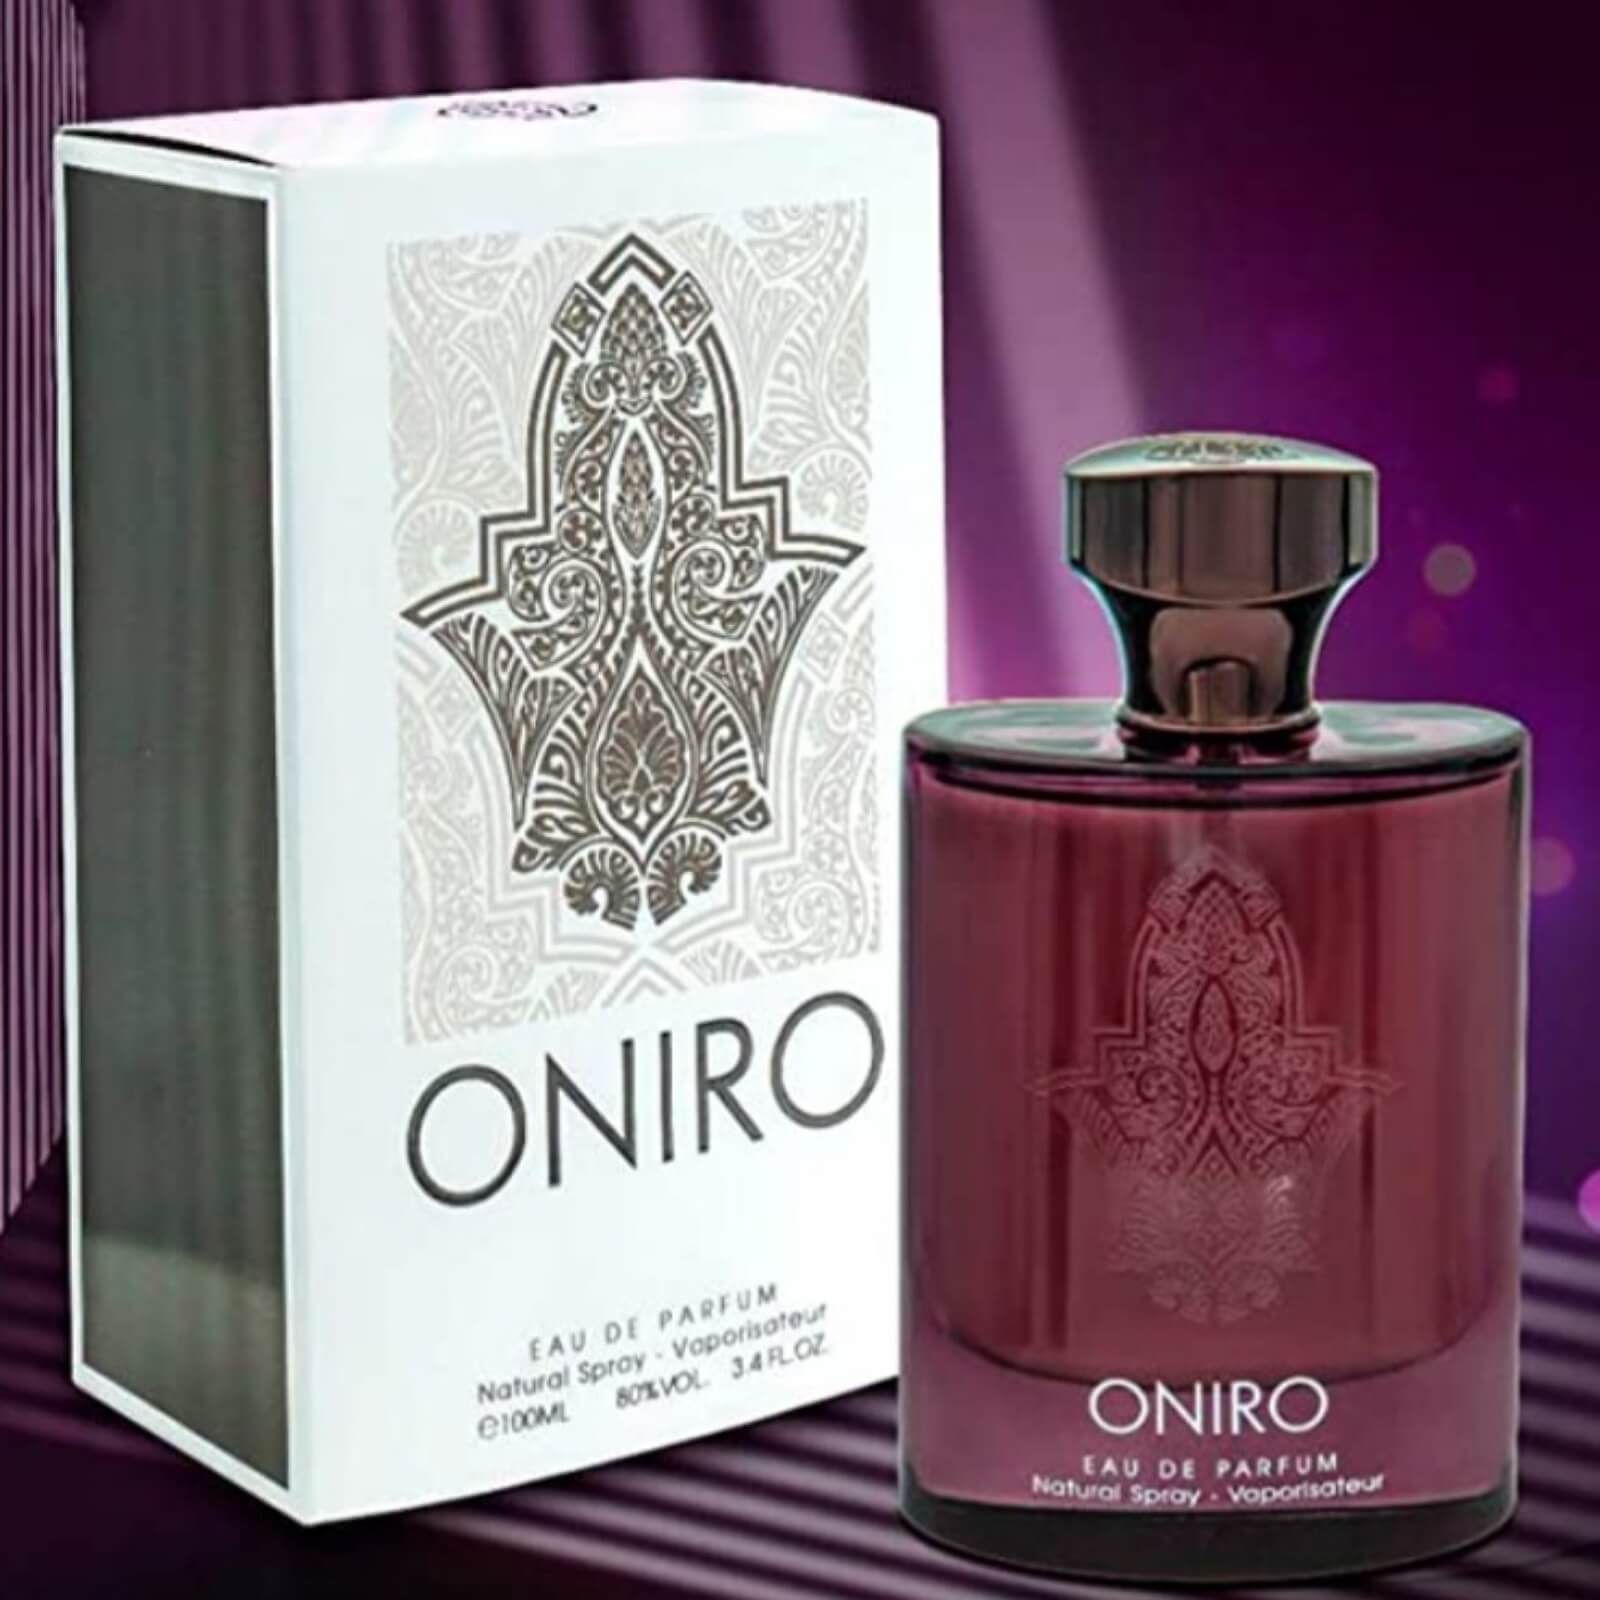 Oniro Perfume, an Exquisite Fragrance that Transcends the